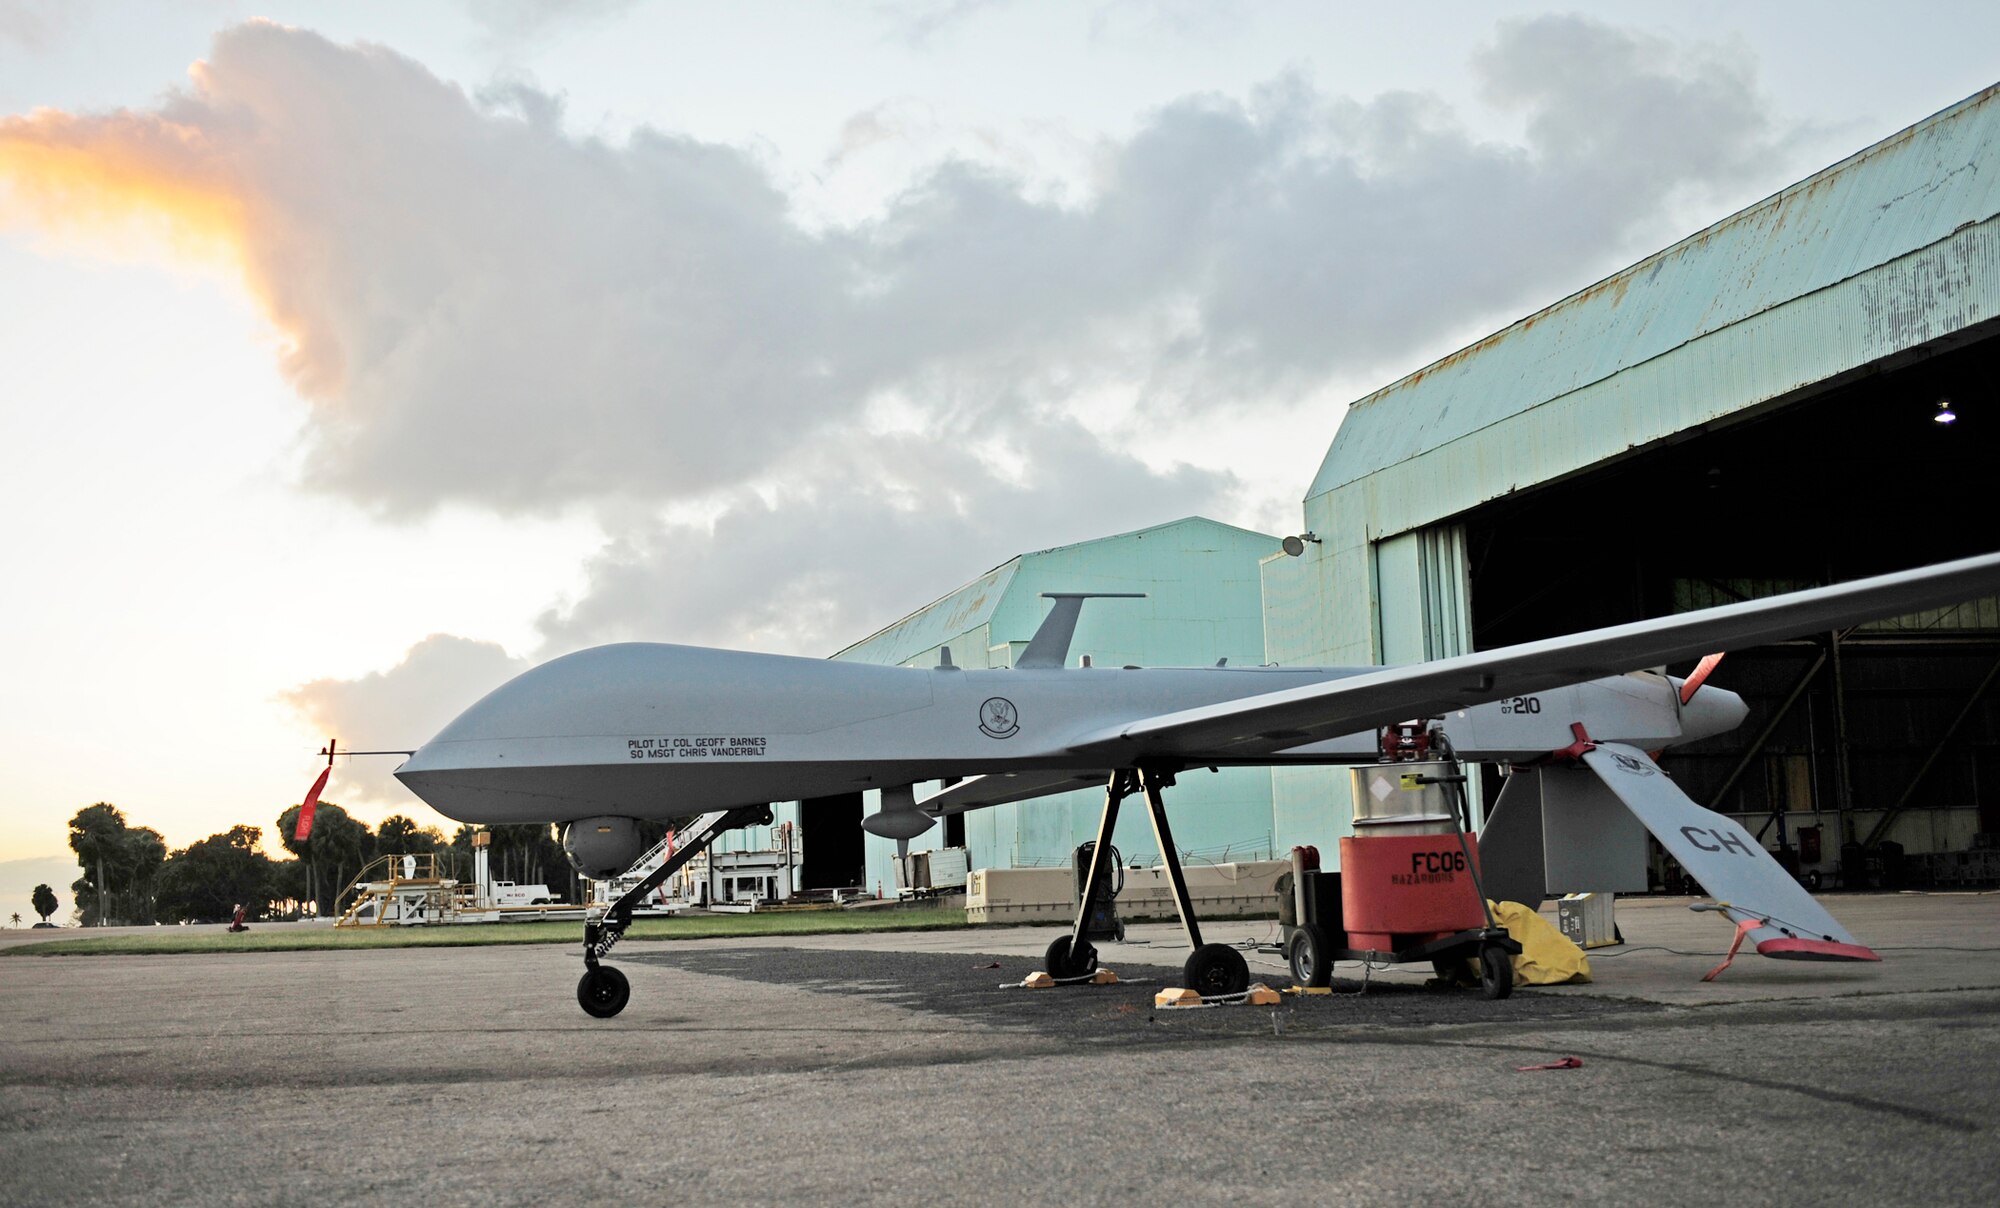 An RQ-1 Predator prepares for takeoff at Aeropuerto Rafael Hernandez Jan. 27, 2010, outside Aguadilla, Puerto Rico. The remotely piloted aircraft are operating out of Puerto Rico in support of Operation Unified Response in Haiti. Airmen from Creech Air Force Base, Nev., are providing 24-hour-a-day full-motion video in real-time to international relief workers on the ground in order to speed humanitarian aid to remote and cut-off areas of the country following the earthquake Jan. 12, 2010. (U.S. Air Force photo/Tech. Sgt. James L. Harper Jr.)